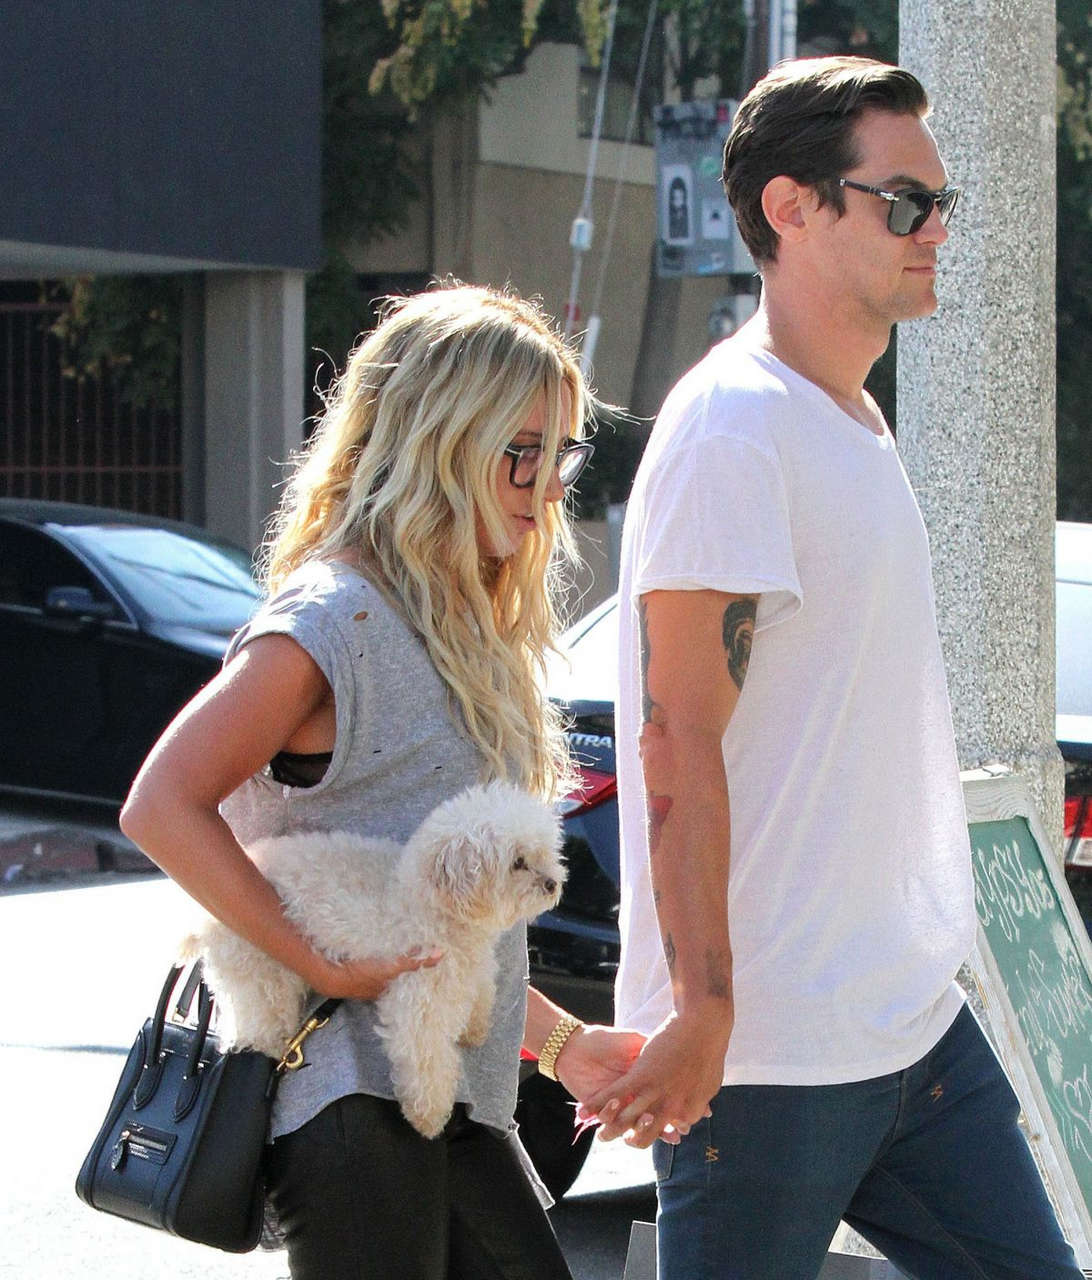 Ashley Risdale Out Shopping Los Angeles